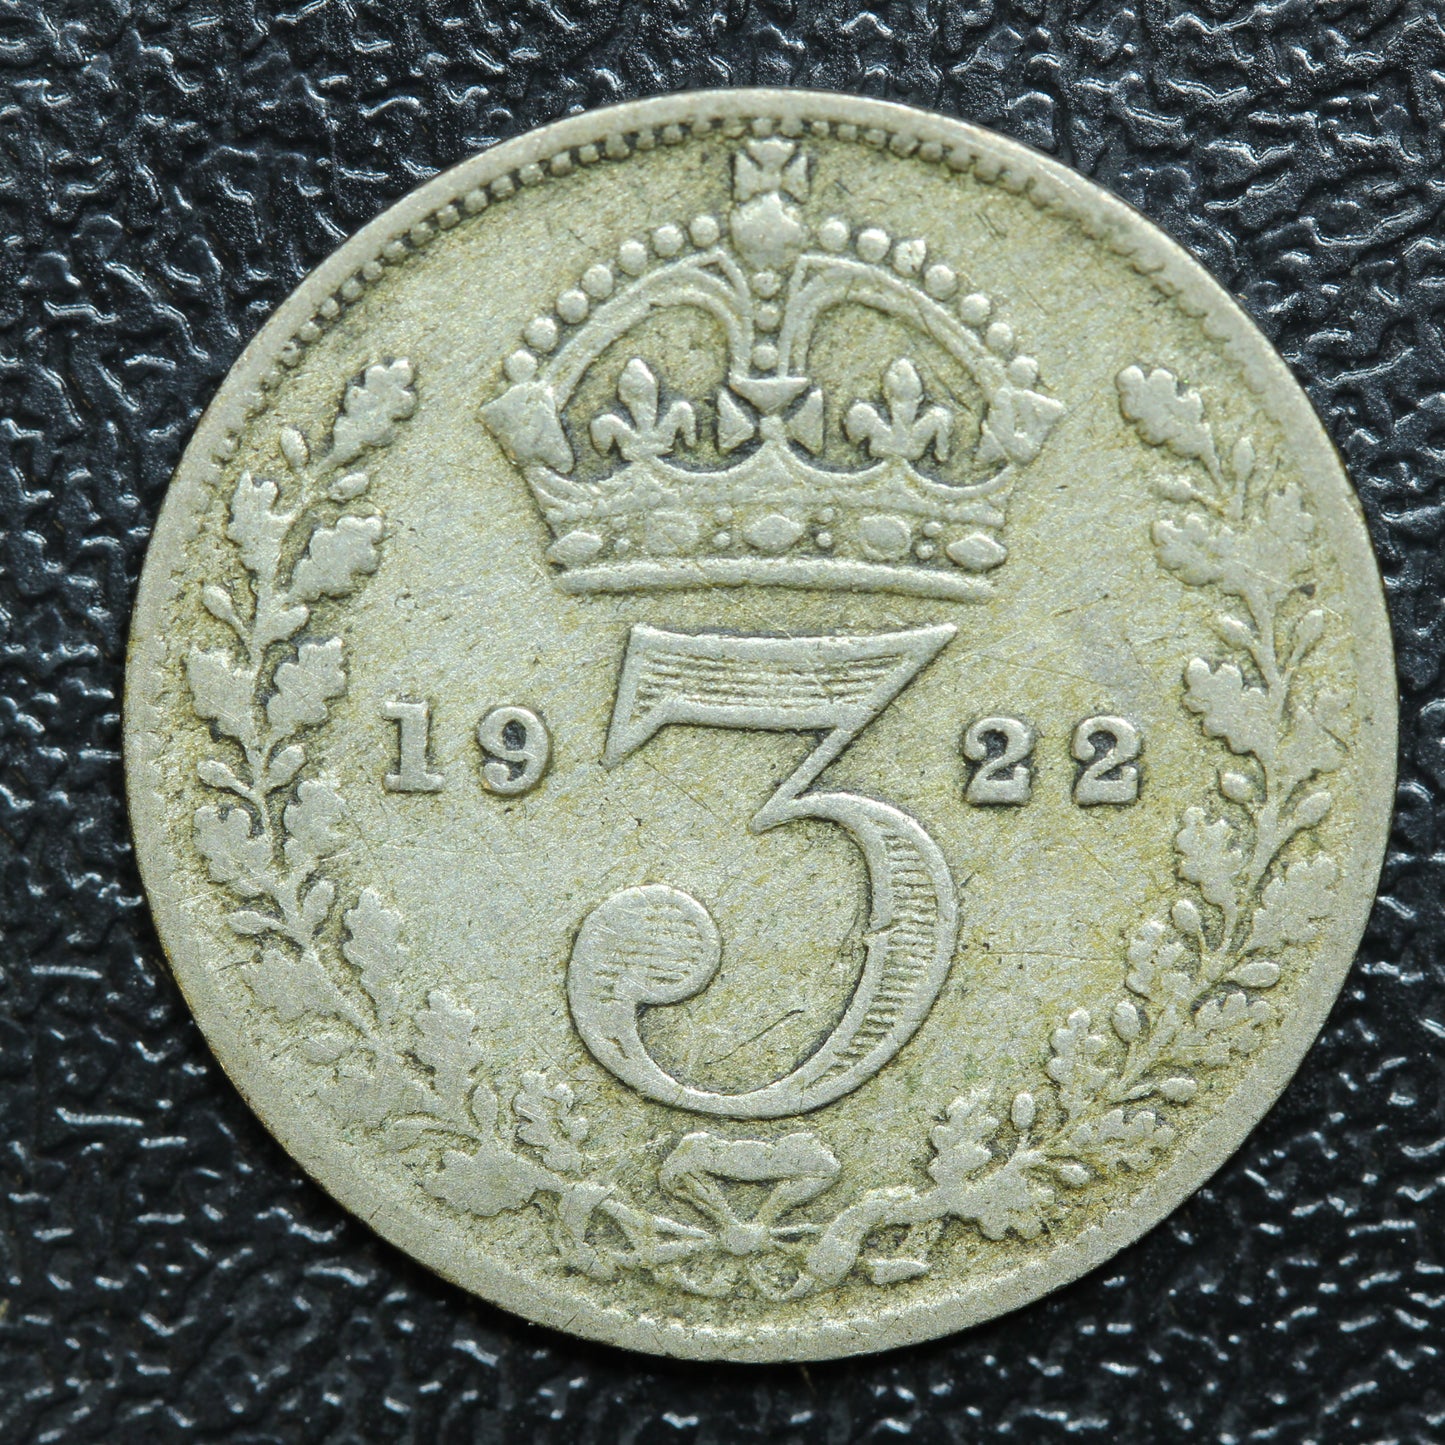 1922 Great Britain 3 Pence Threepence Silver Coin - KM# 813a